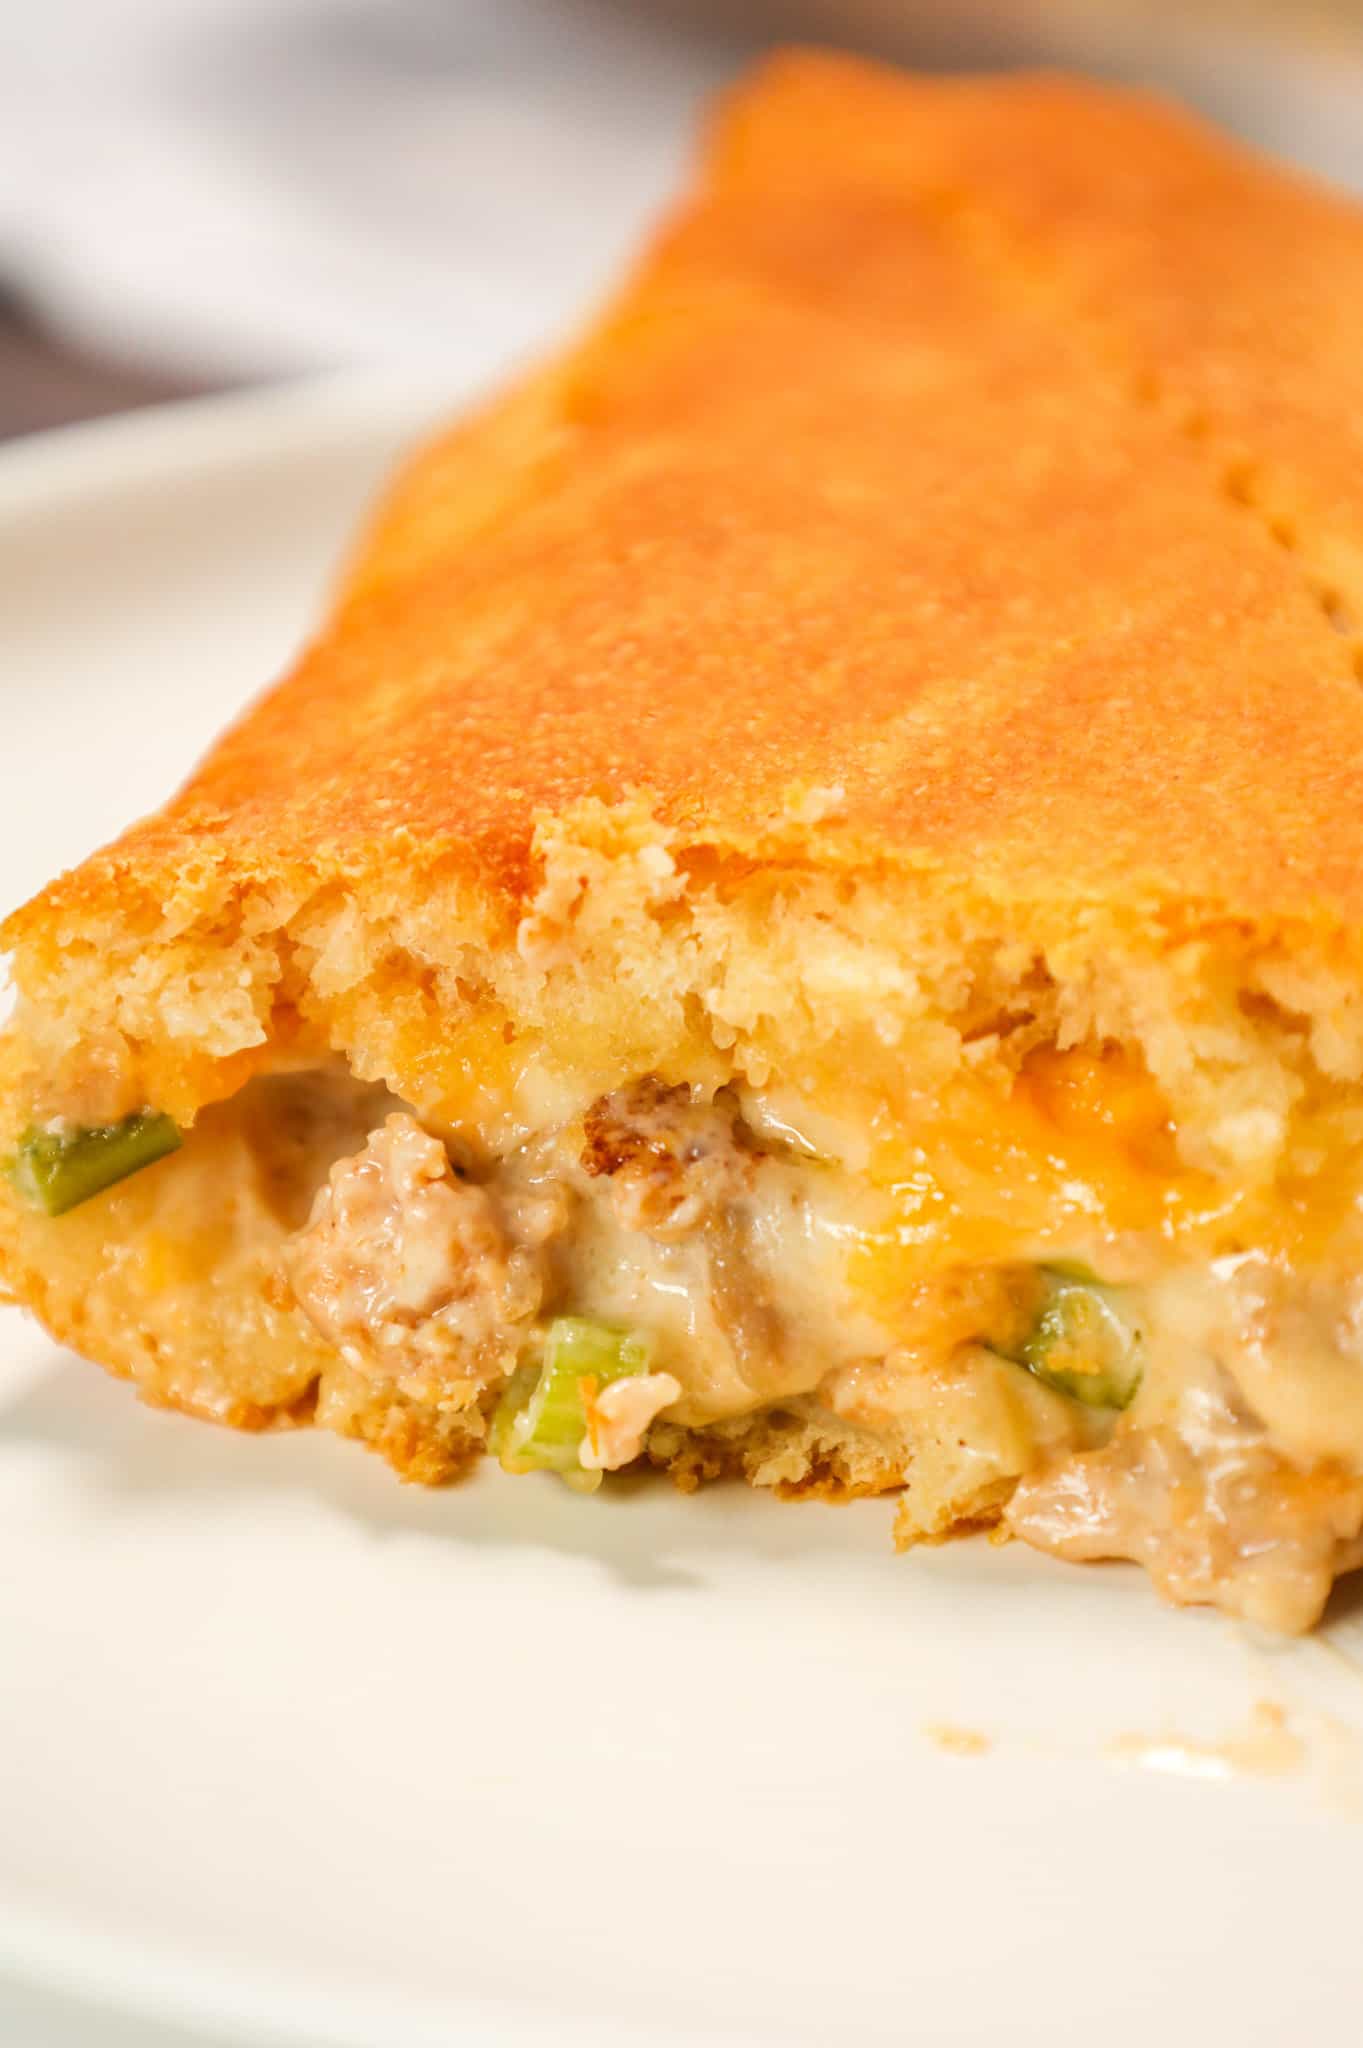 Sausage Cream Cheese Casserole is a delicious breakfast casserole loaded with pork sausage meat, cream cheese, maple syrup, cheddar cheese and green onions all baked between two layers of Pillsbury crescent rolls.